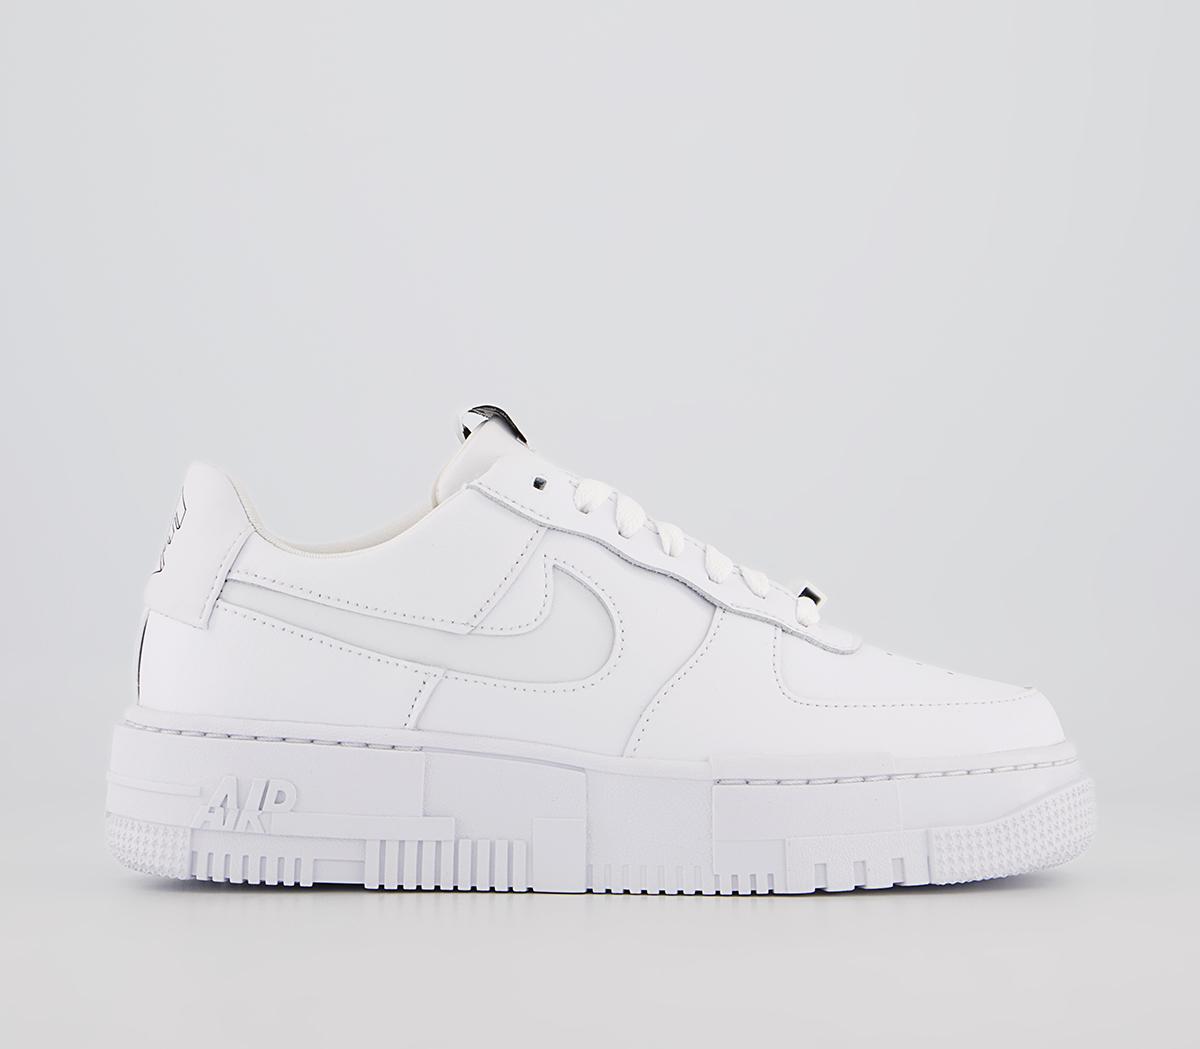 air force trainers white